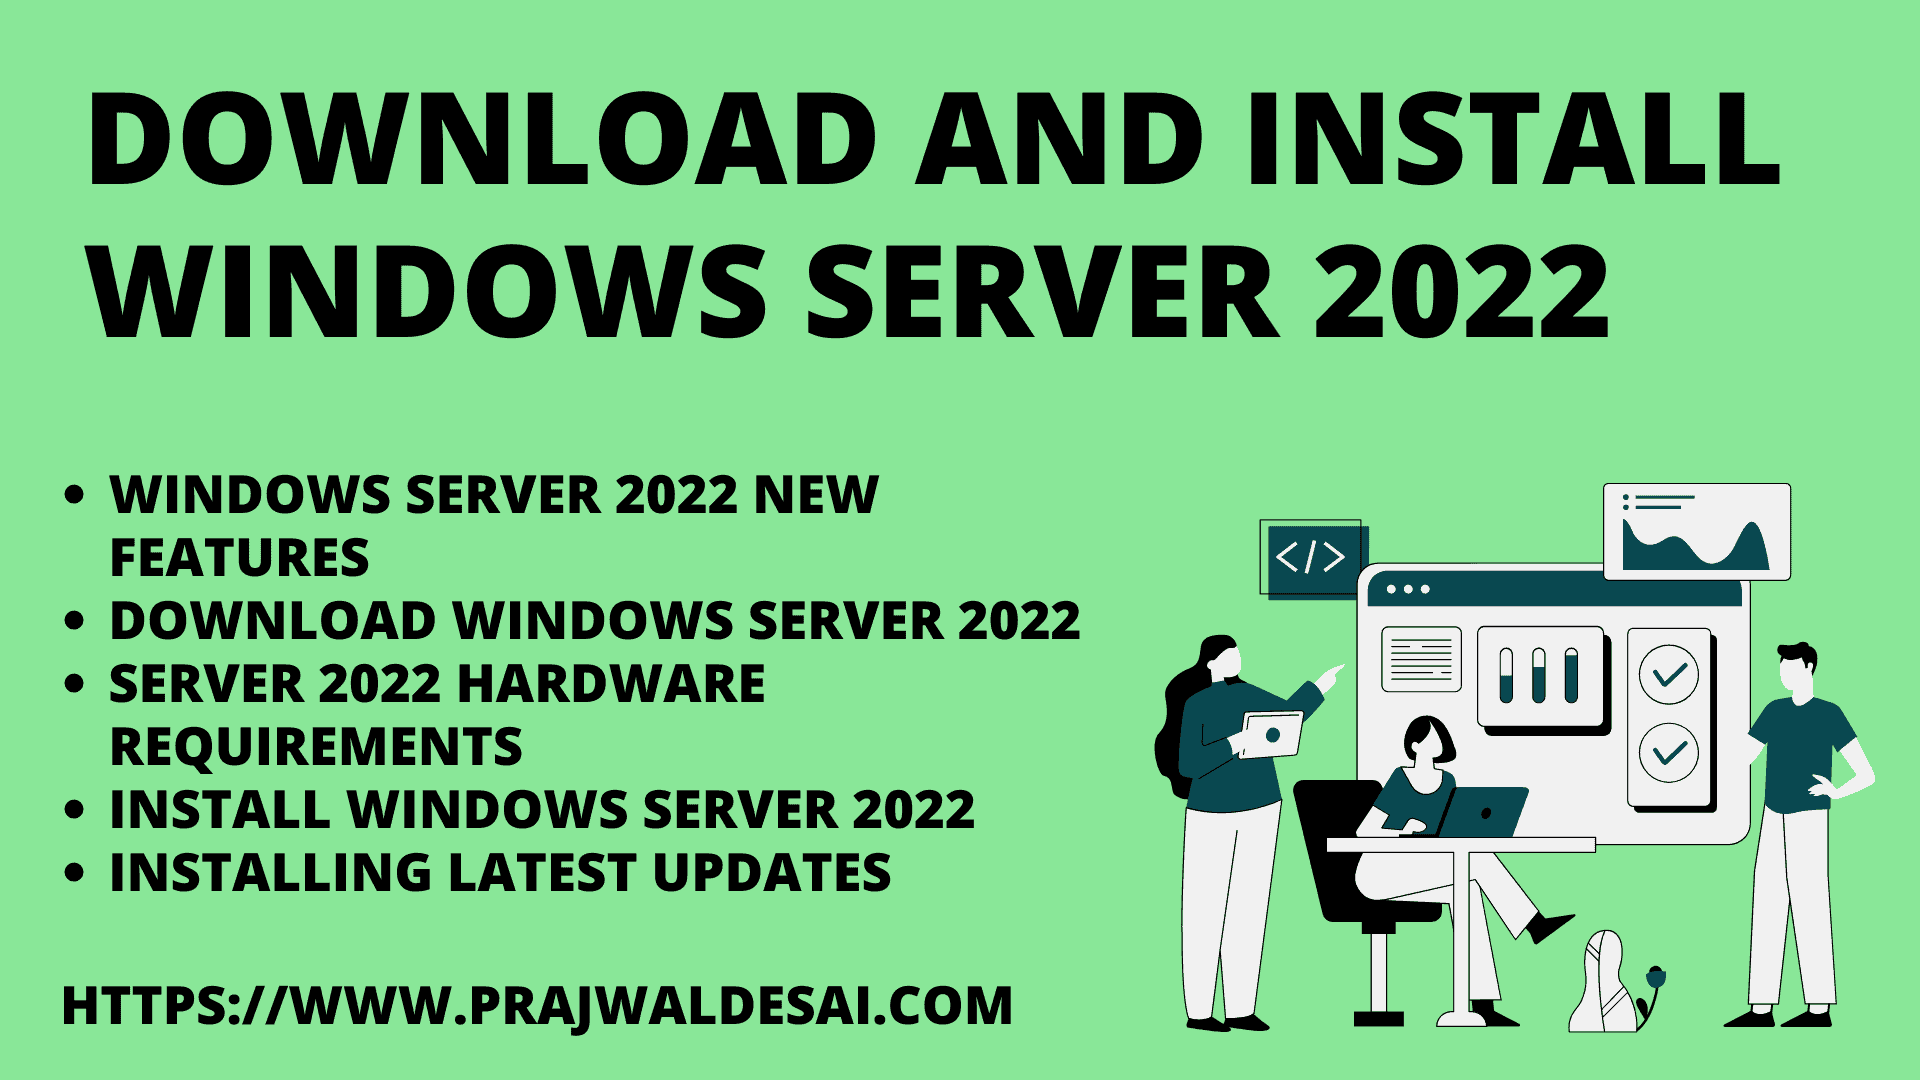 Download and Install Windows Server 2022